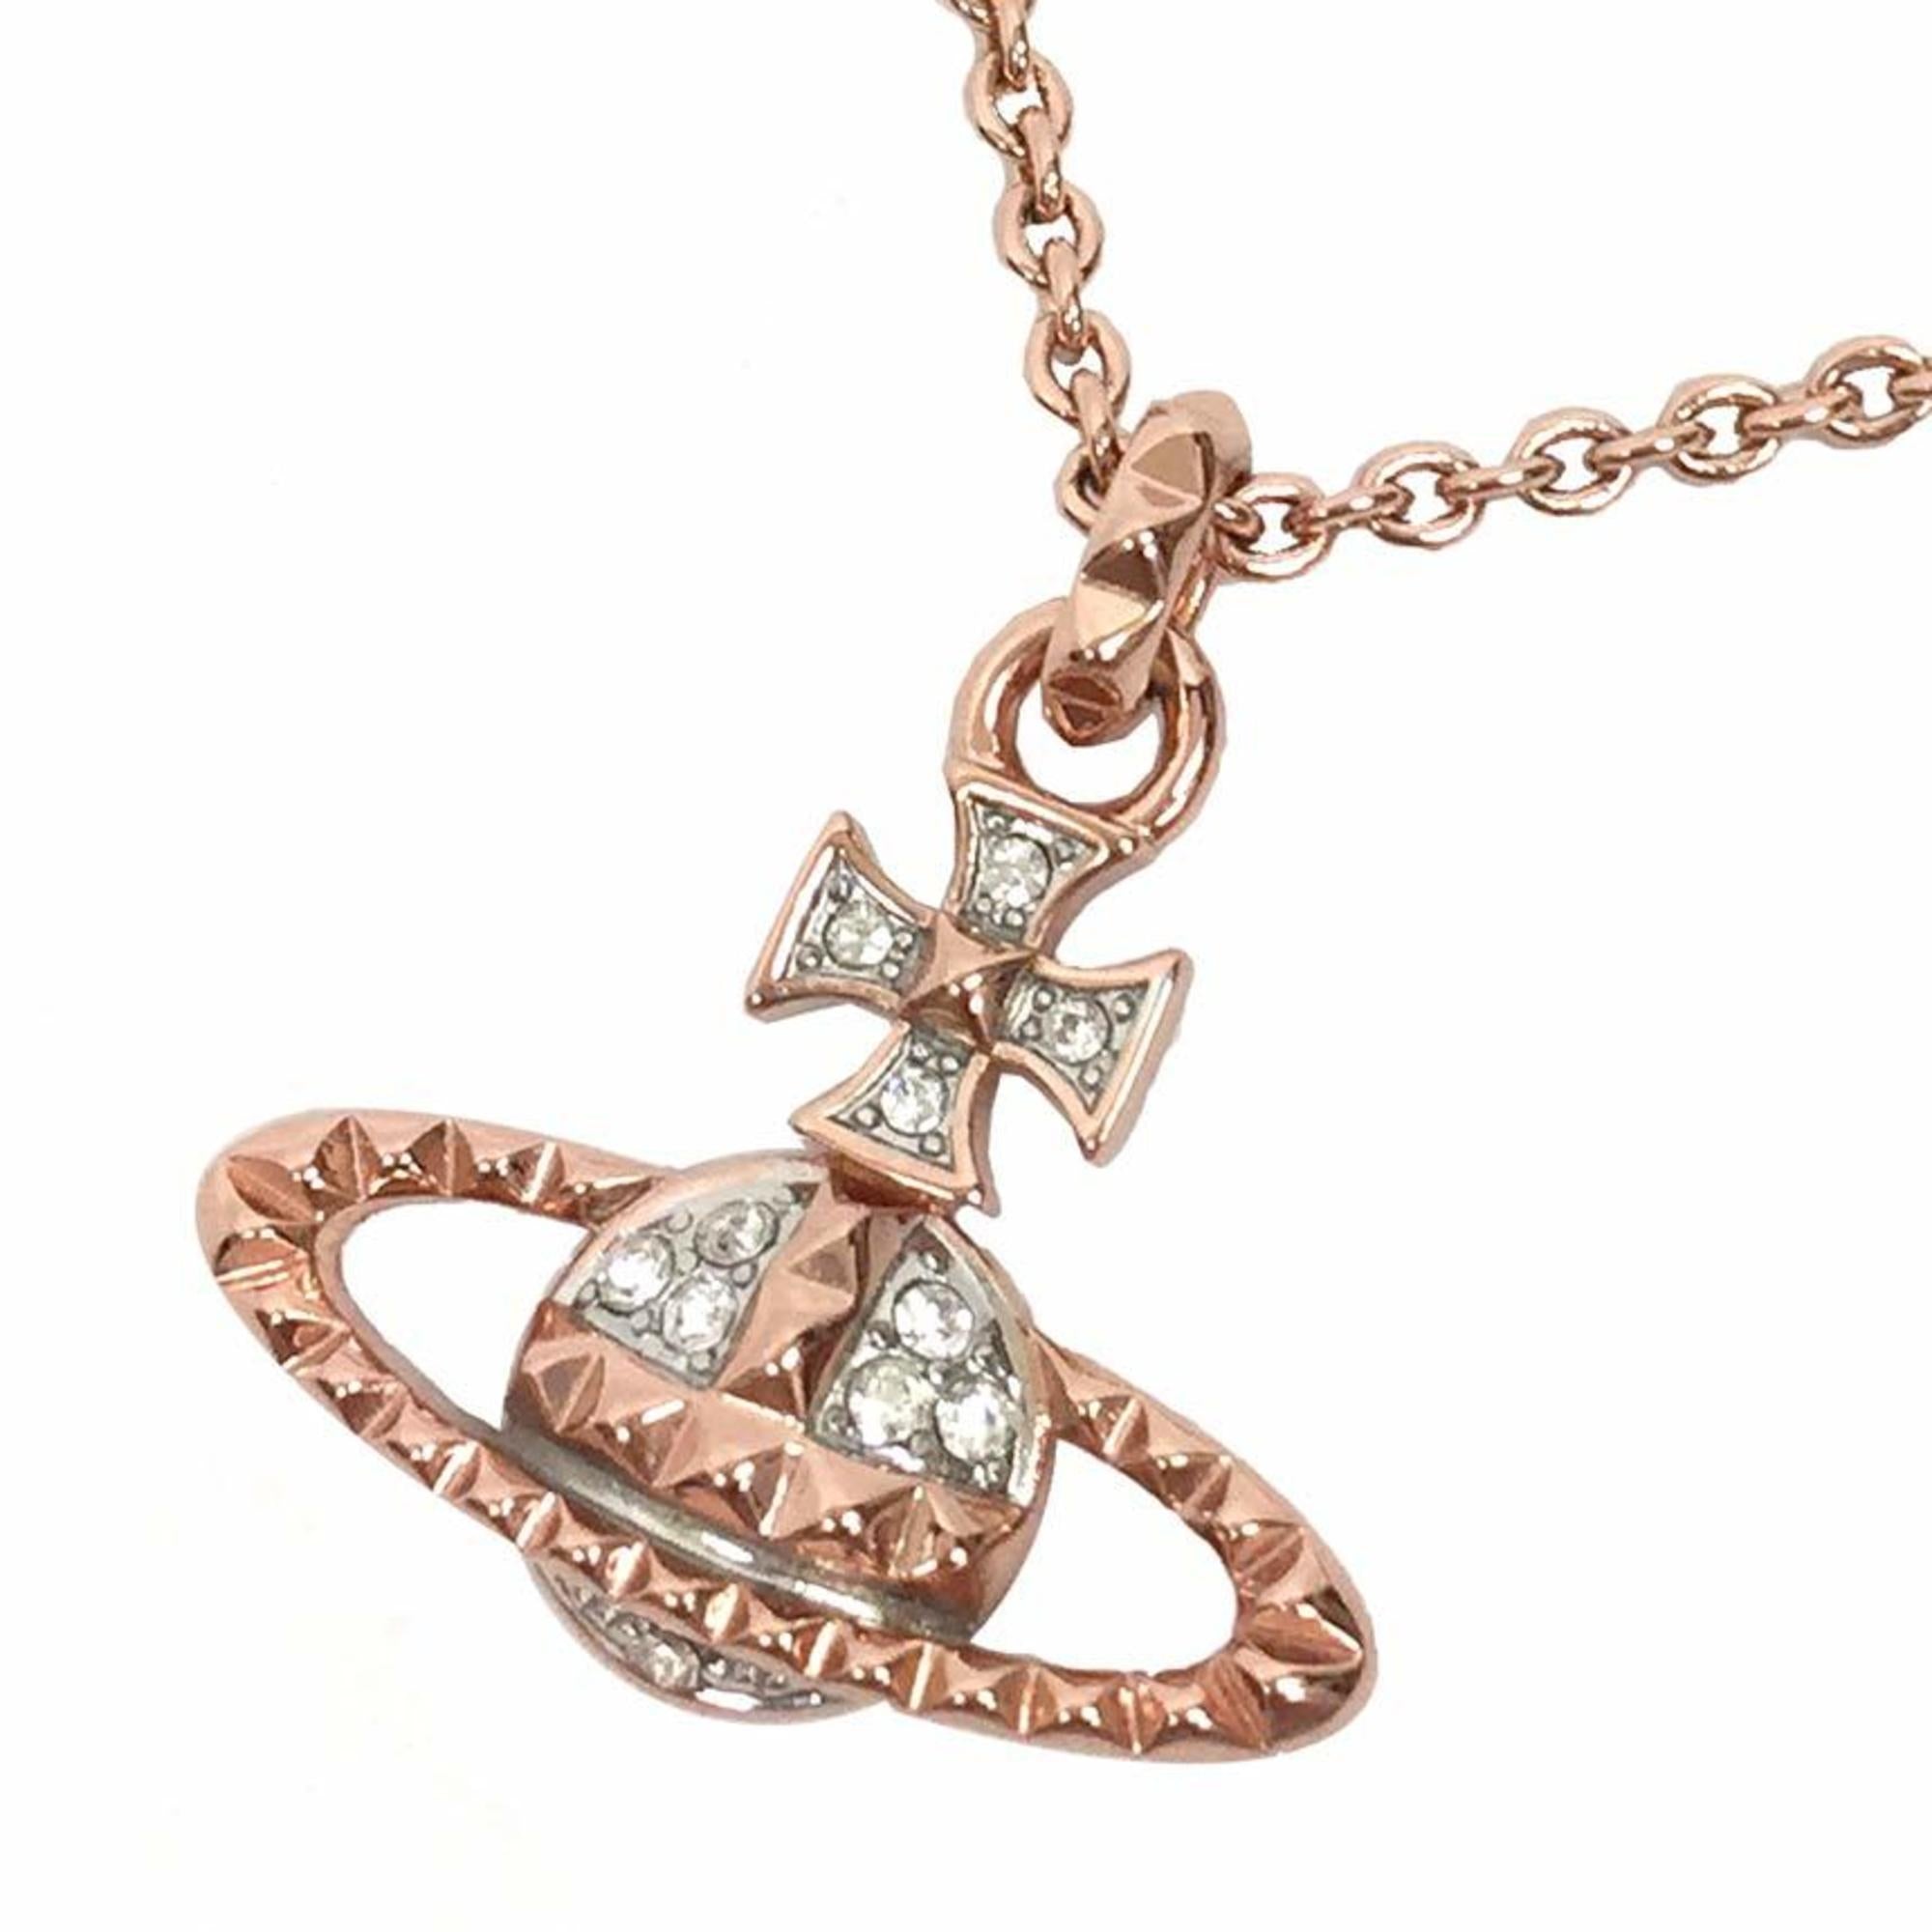 Mayfair Small Orb Pendant Necklace in RHODIUM-Crystal | Vivienne Westwood®